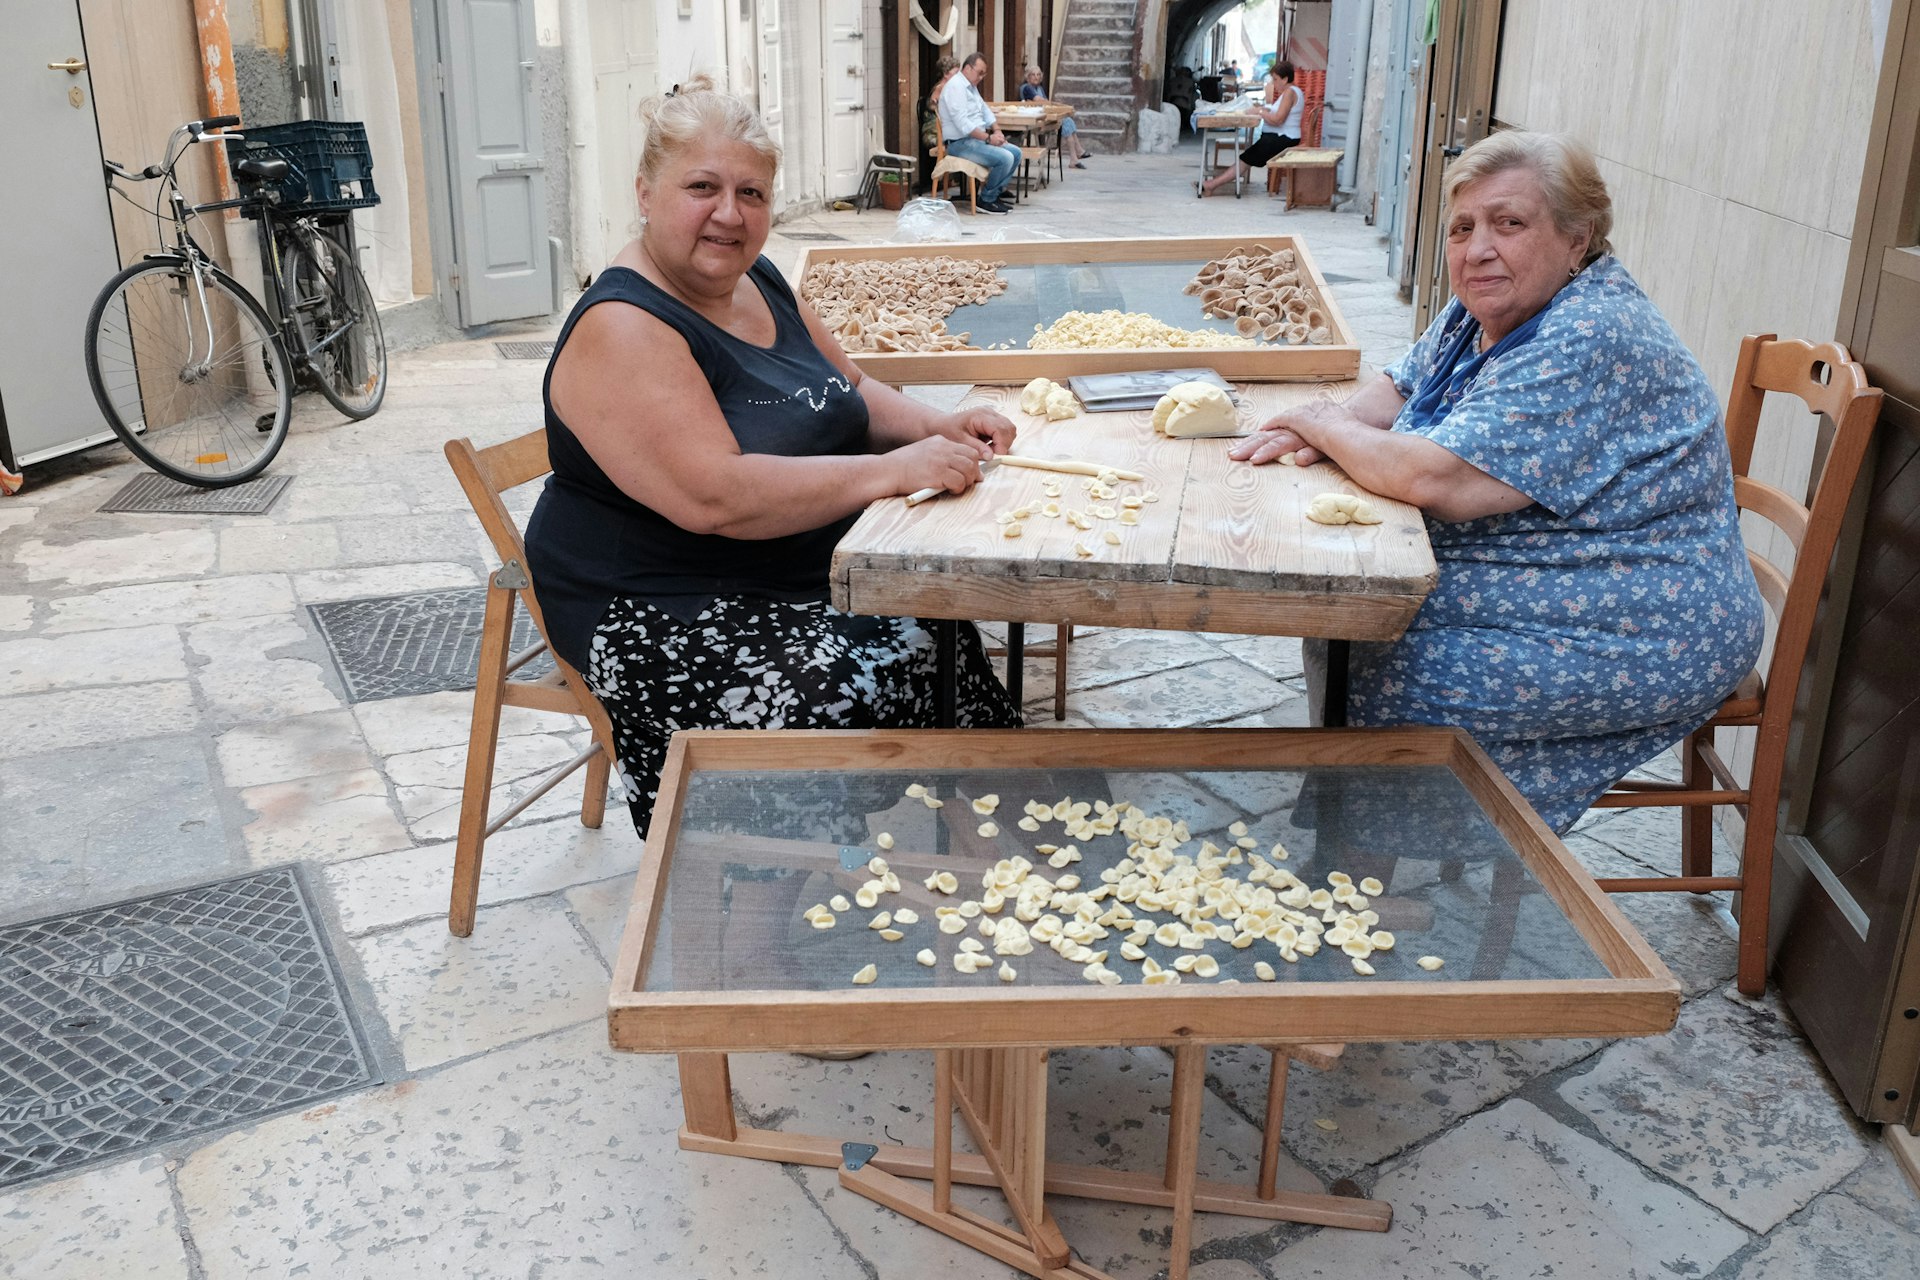 Women working at a table in the street making pasta, Bari, Puglia, Italy